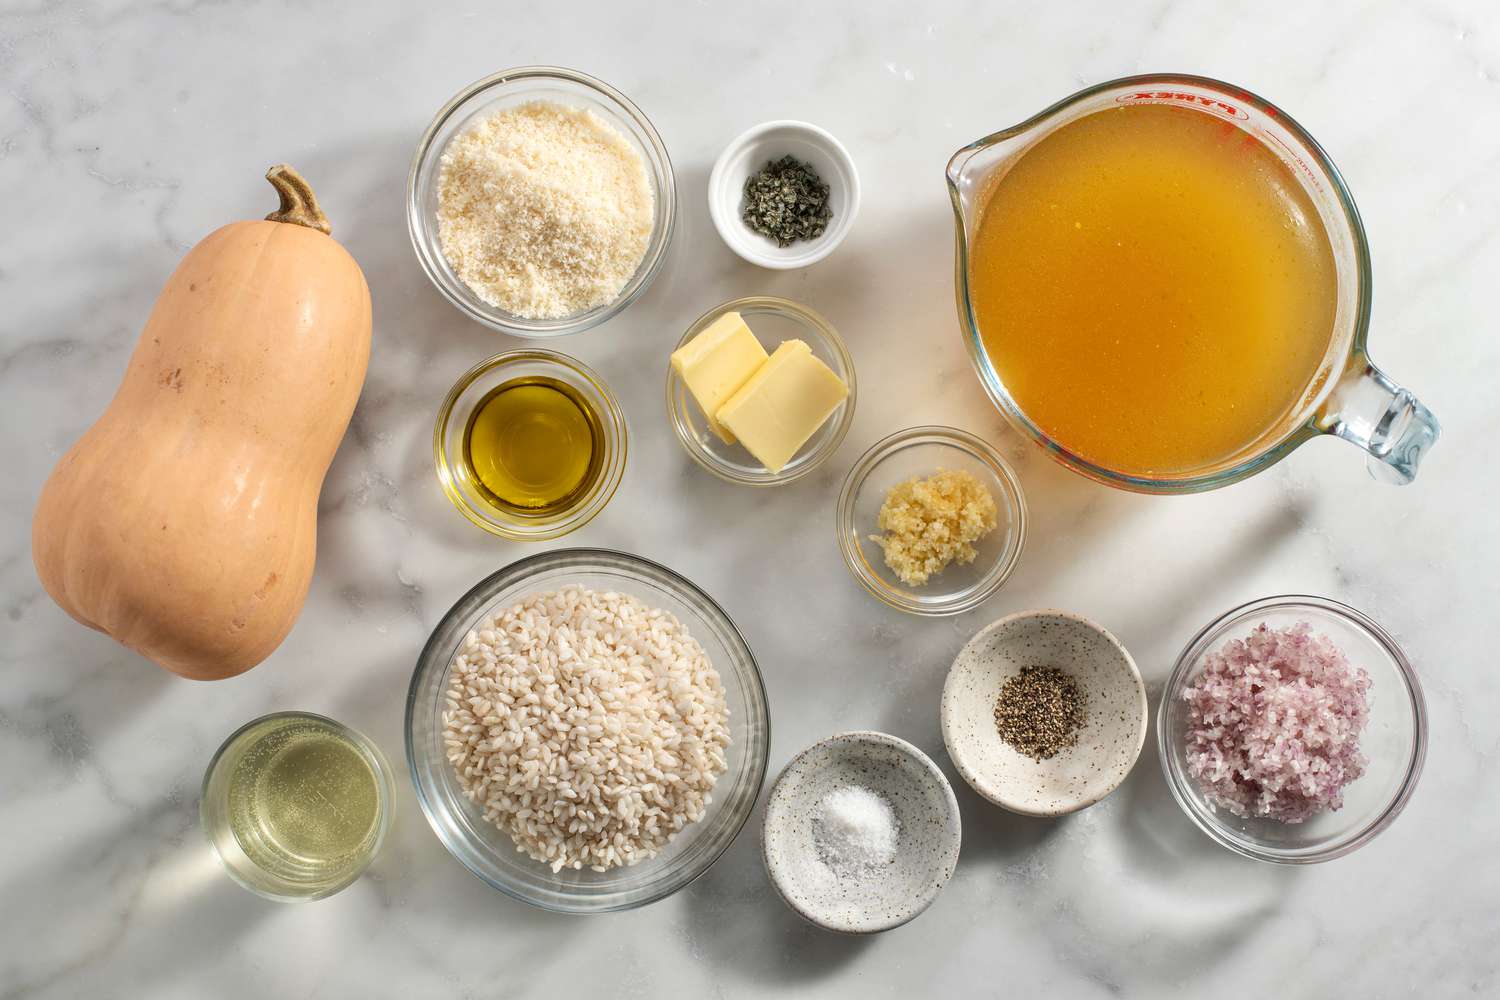 butternut squash risotto ingredients gathered